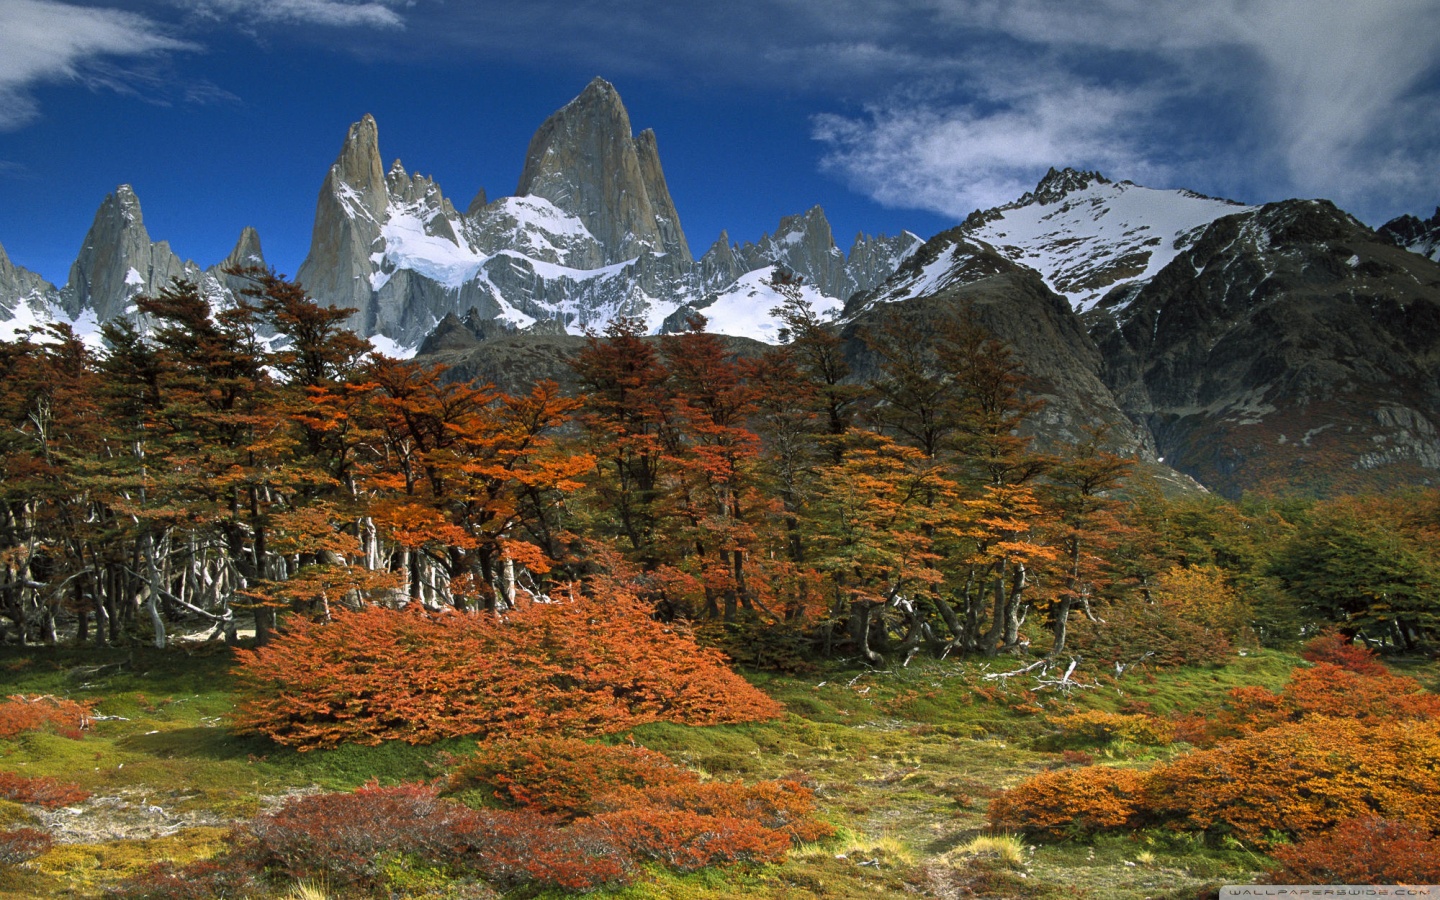 Fitzroy And Beech Trees In Autumn Los Glaciares National Park